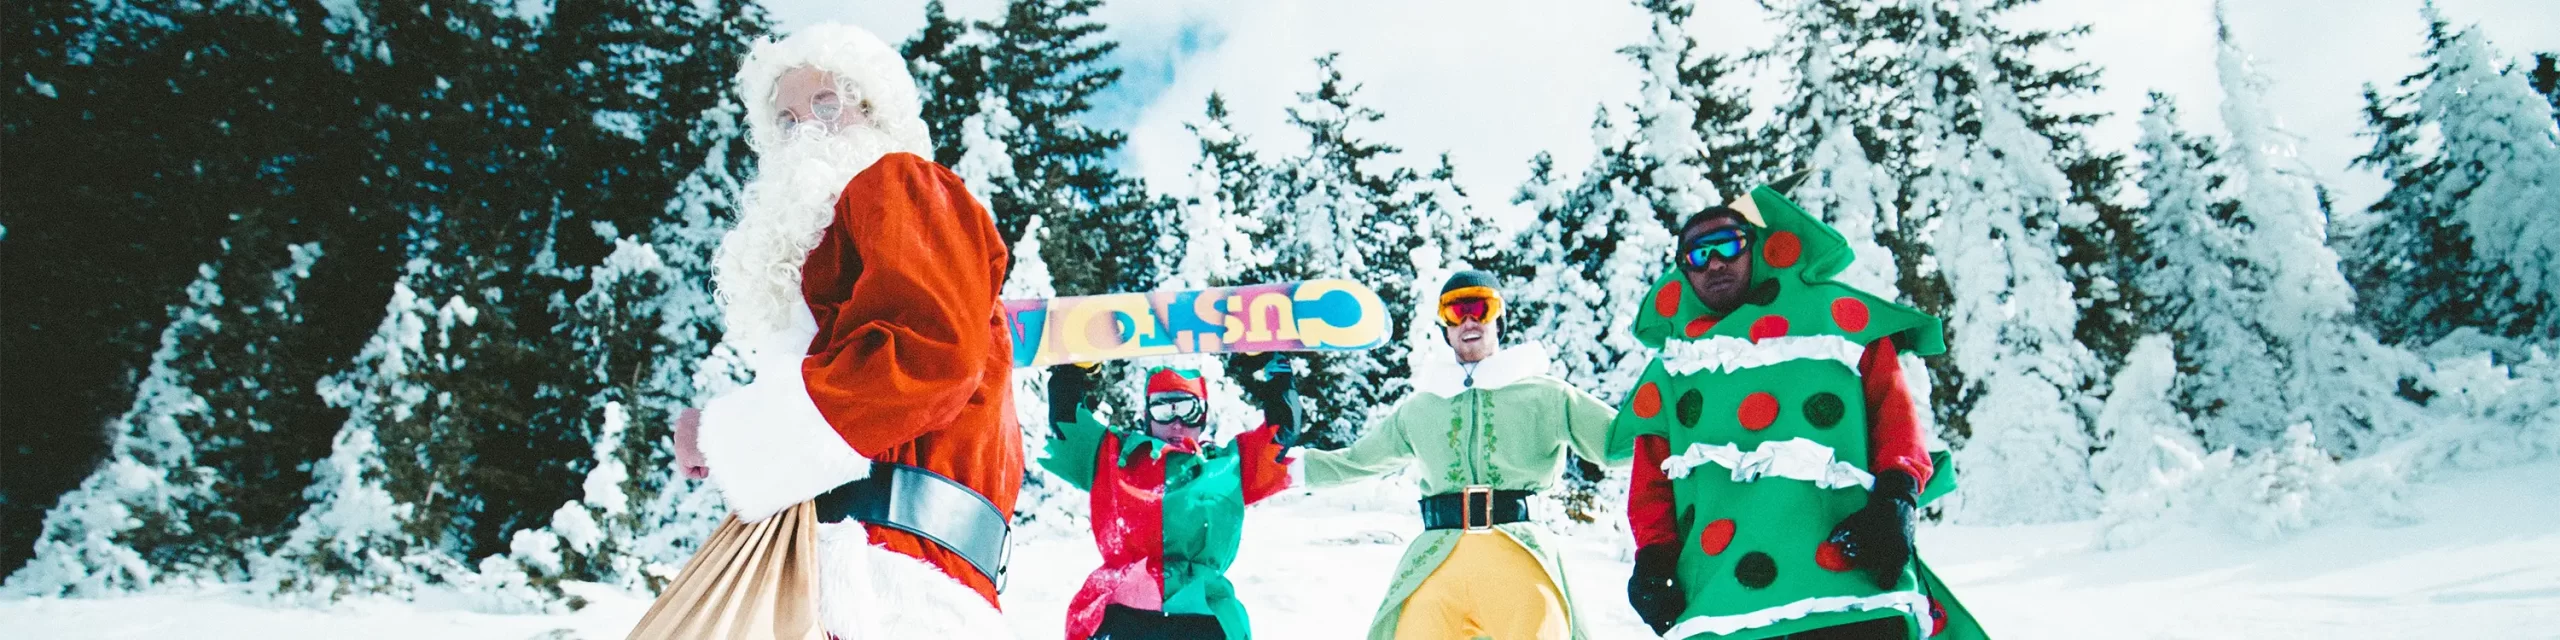 Snowboarders on snowy mountain dressed as Christmas elves, Santa and a Christmas tree